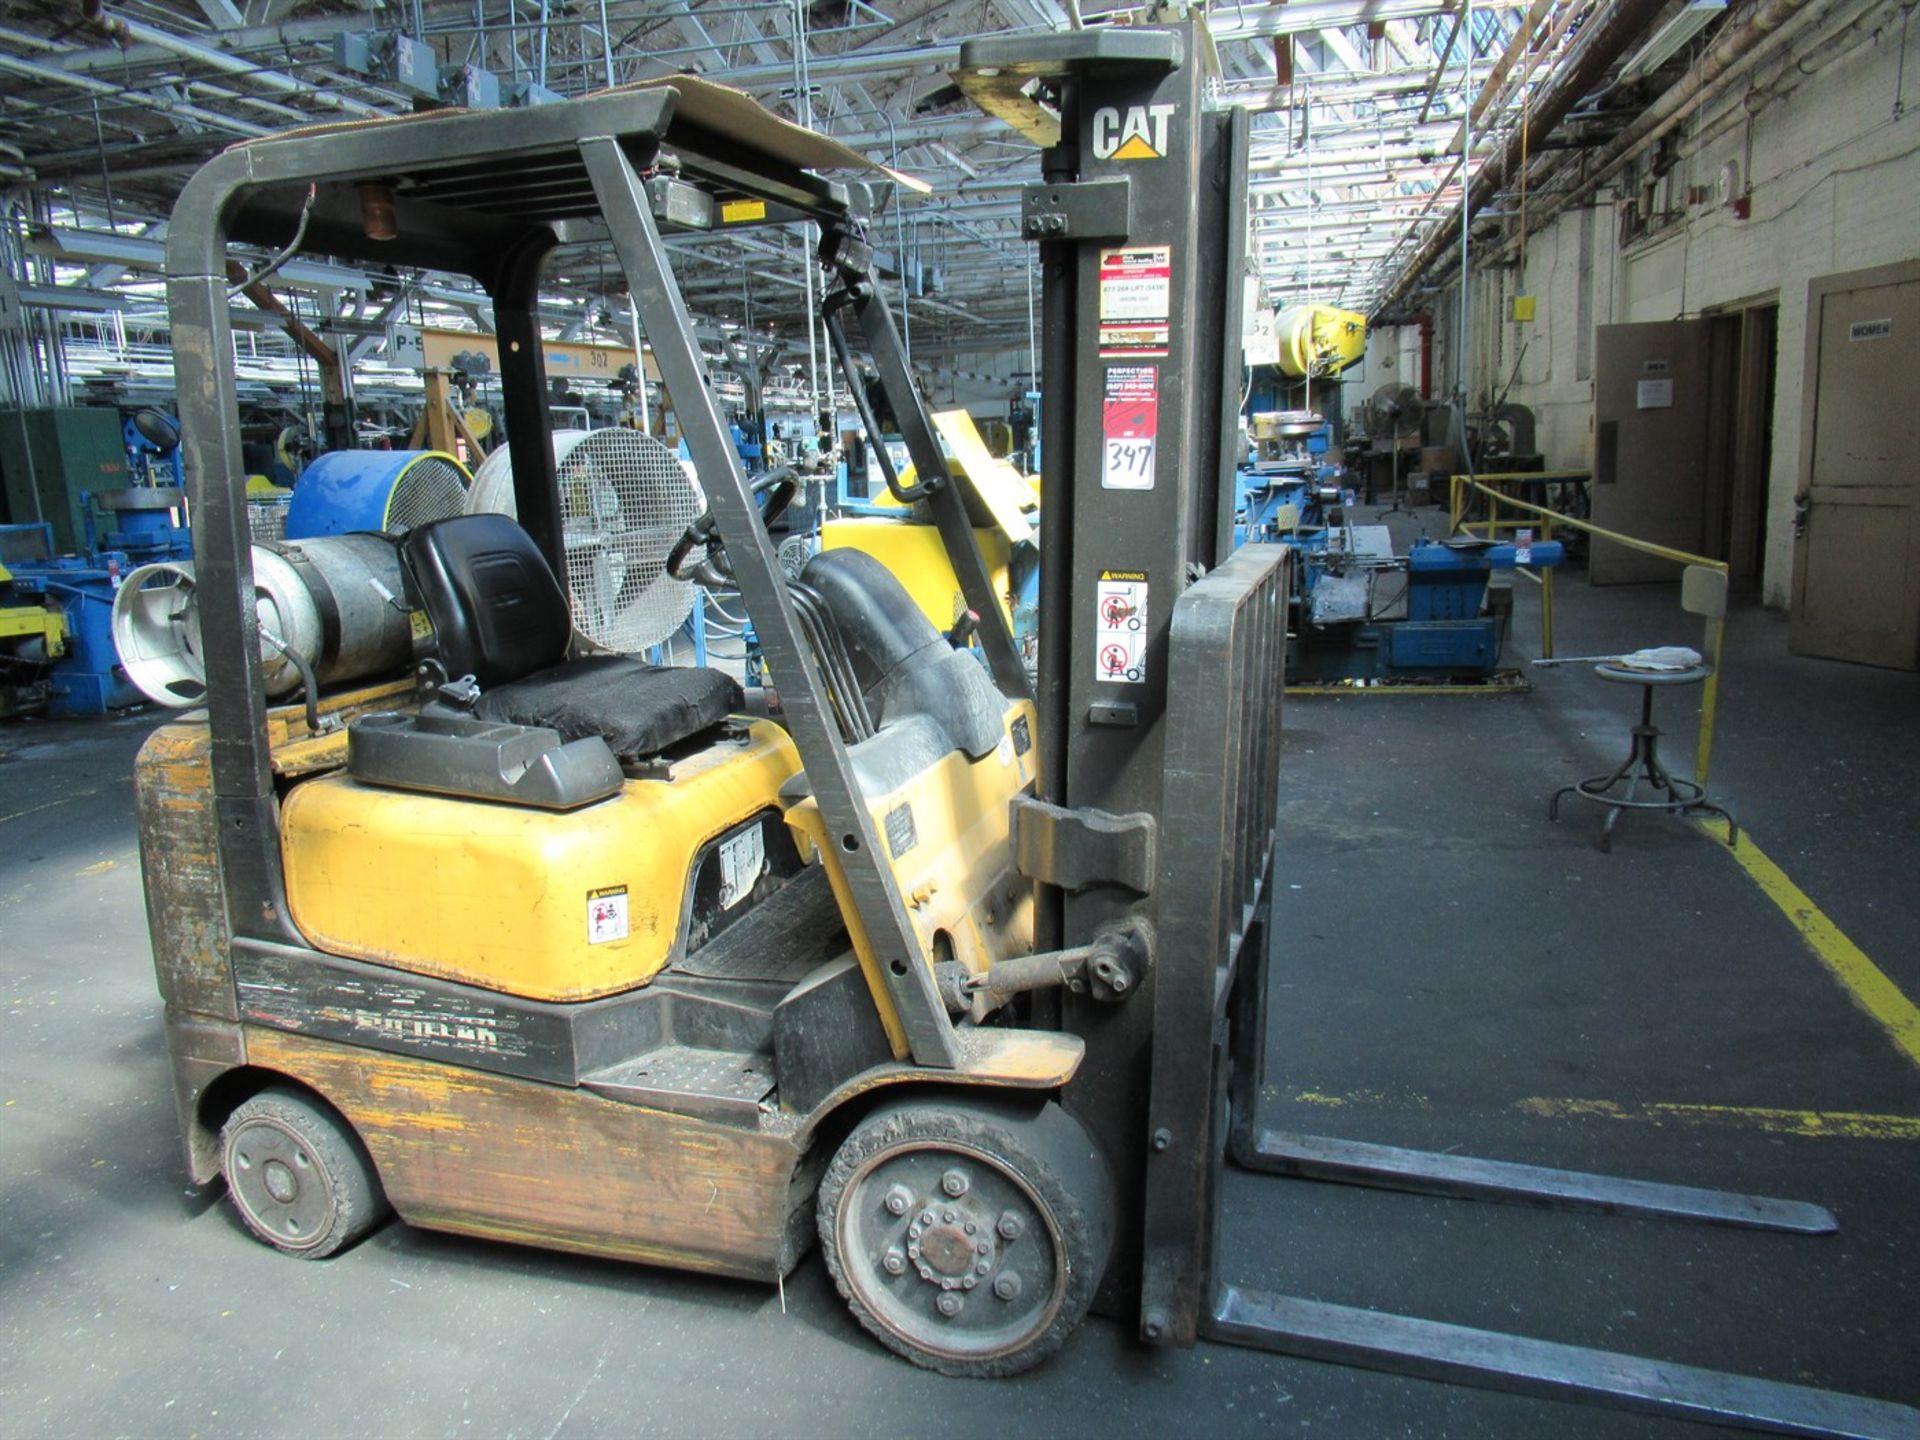 CATERPILLAR GC20K LP Forklift, s/n AT82C01839, 4000 Lb. Capacity, 2-Stage Mast, 42” Fork Length - Image 2 of 5